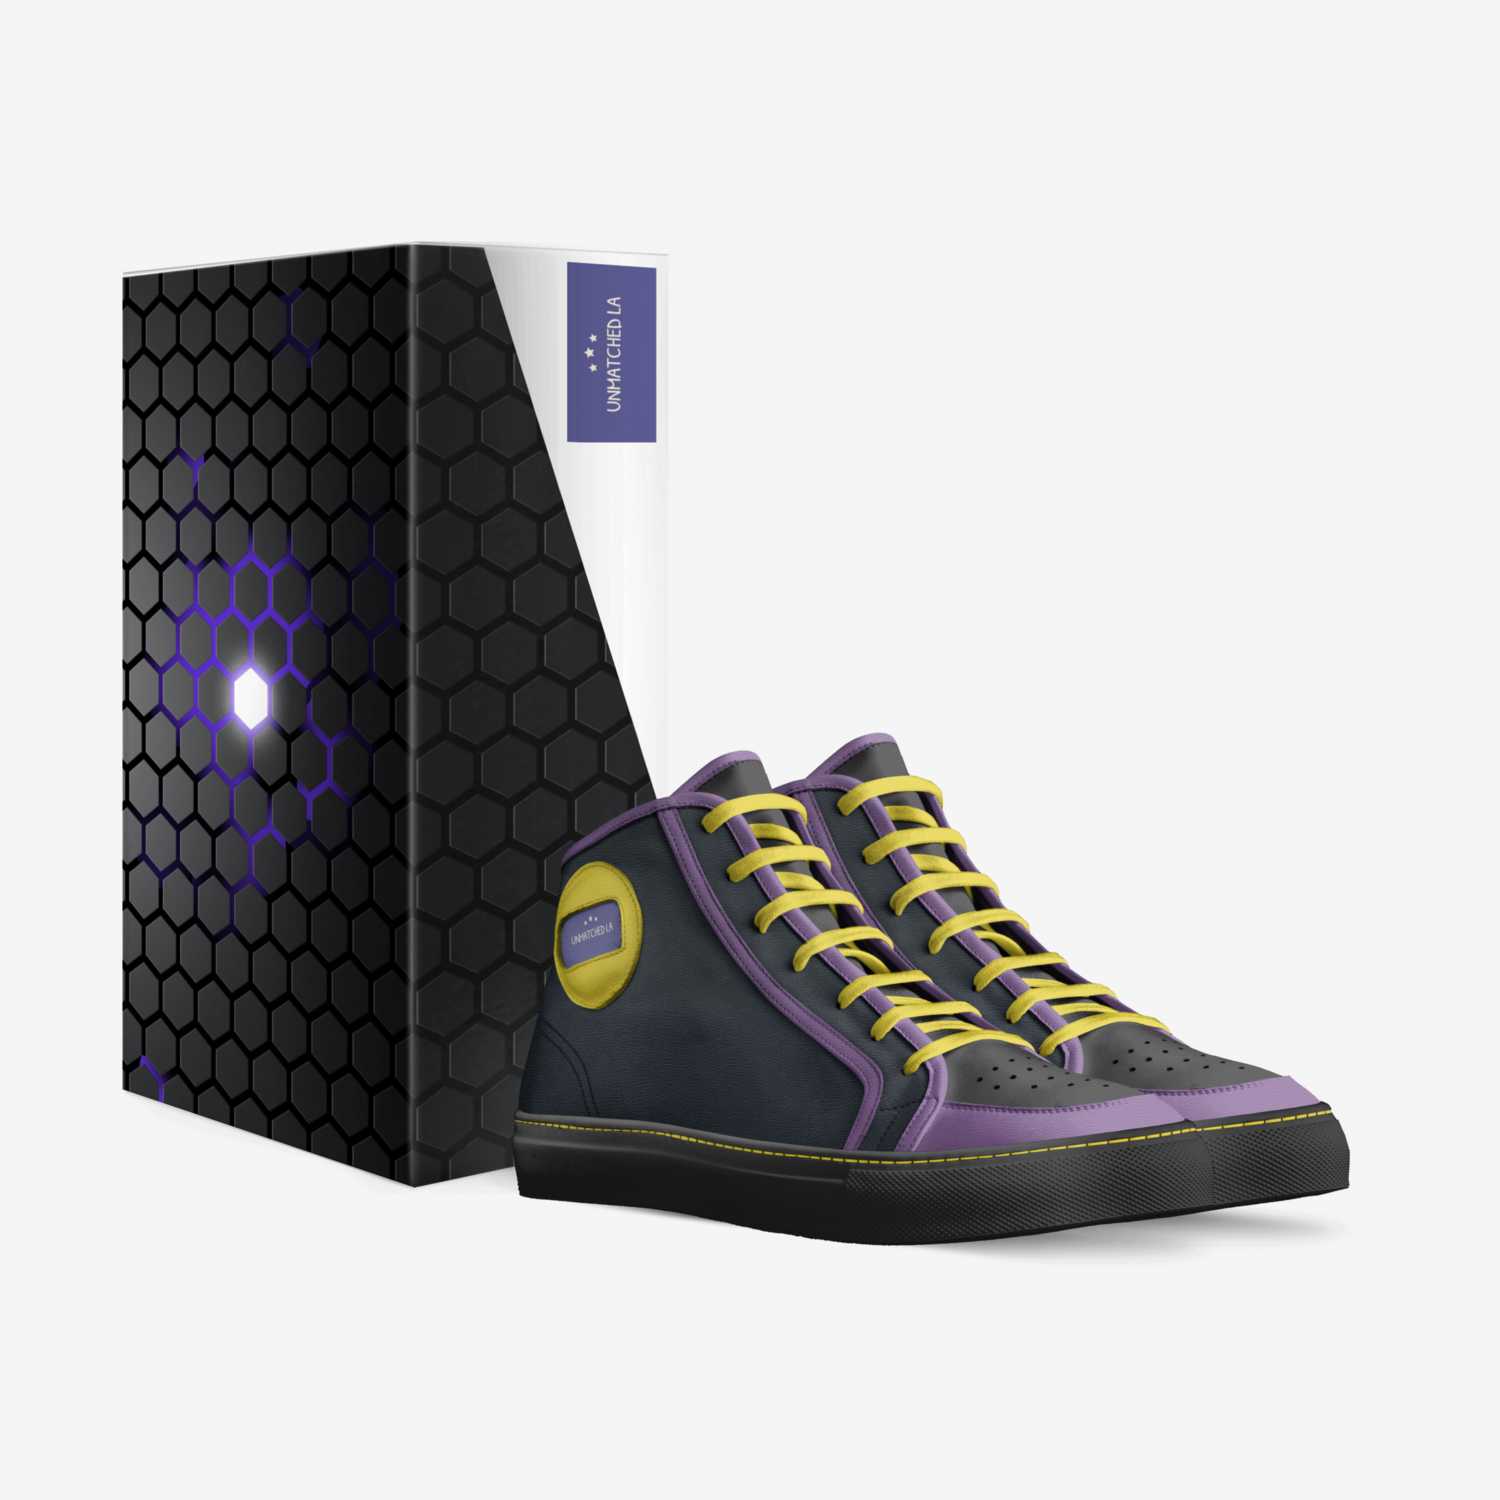 Lakers custom made in Italy shoes by Rafael Barboza | Box view